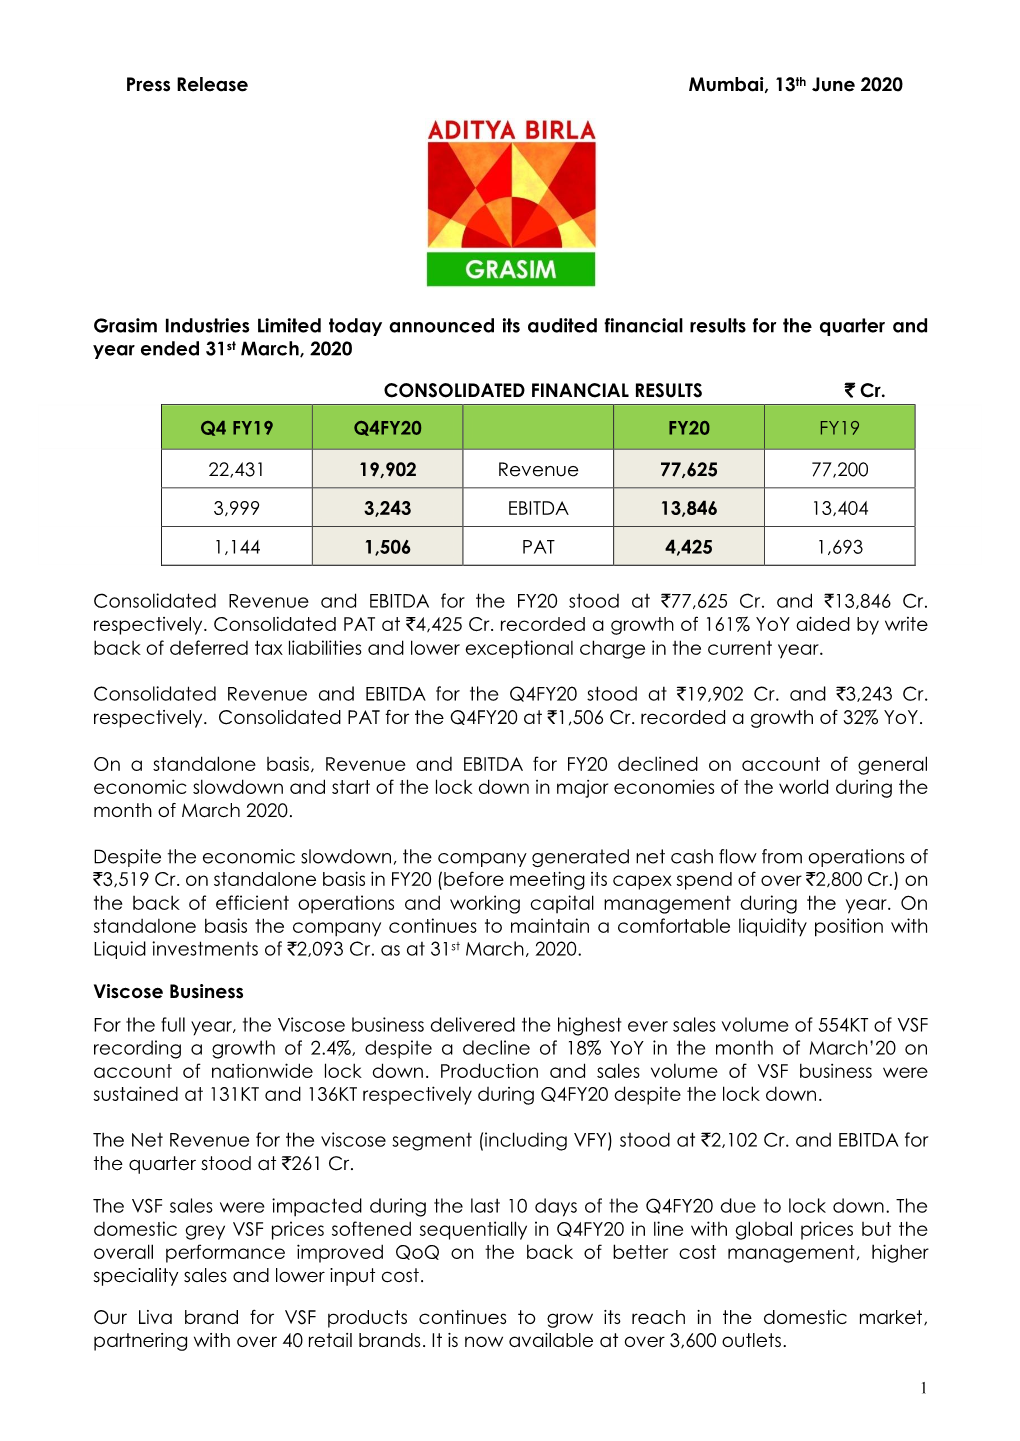 Press Release Mumbai, 13Th June 2020 Grasim Industries Limited Today Announced Its Audited Financial Results for the Quarter